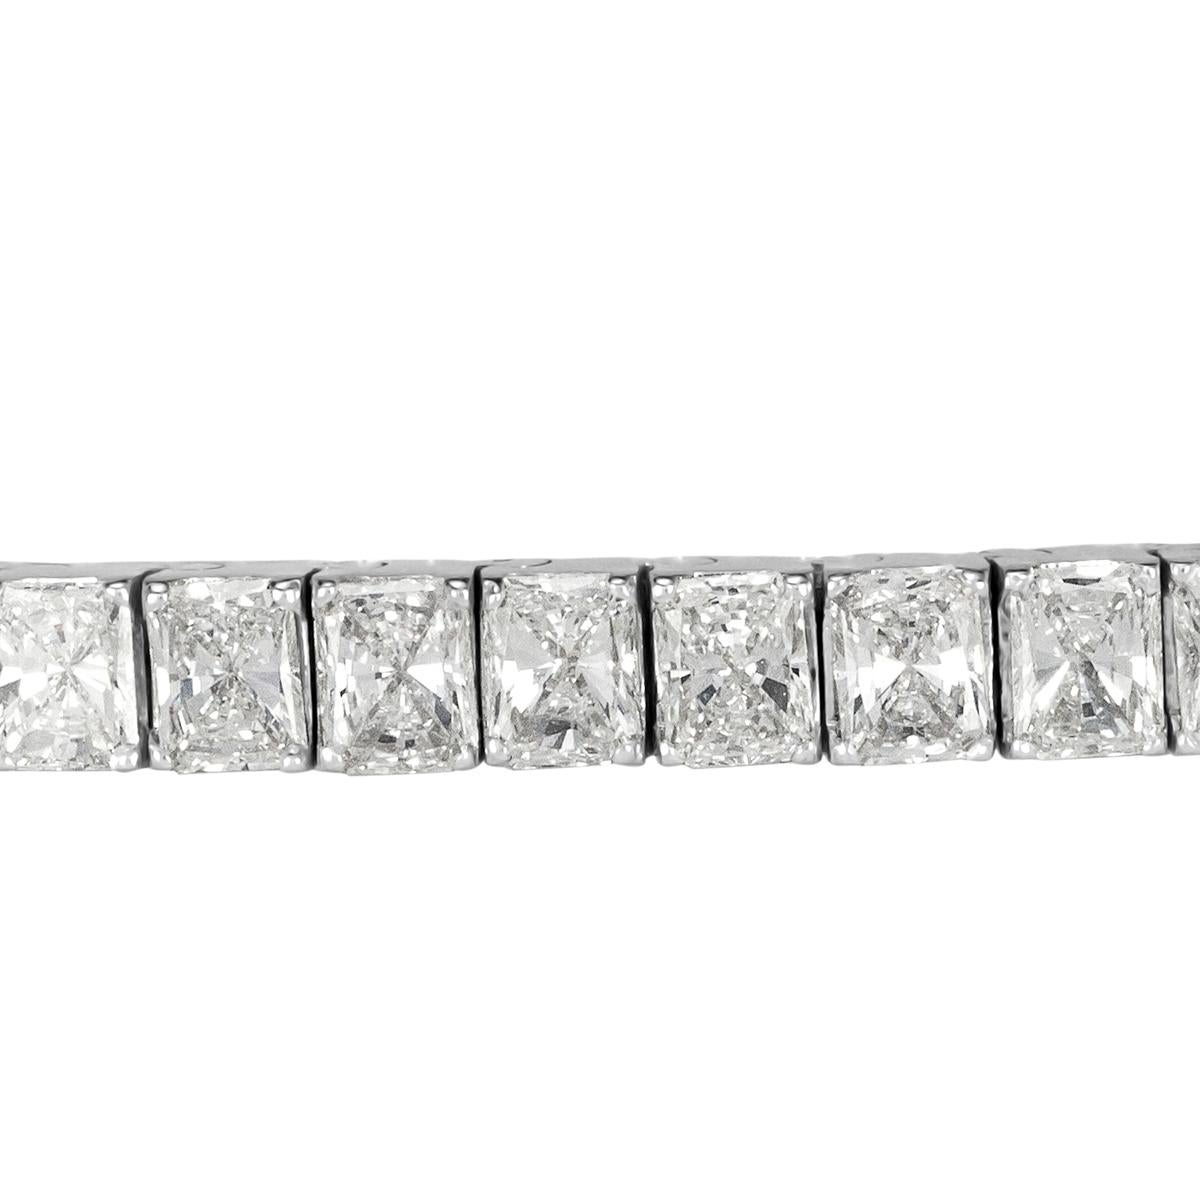 This stunning diamond tennis bracelet showcases 8.84ct of gleaming radiant cut diamonds graded at F-G in color, VS1-VS2 in clarity. They are set in a classic 18k white gold, four-prong setting style. Each of the diamonds is hand selected to match